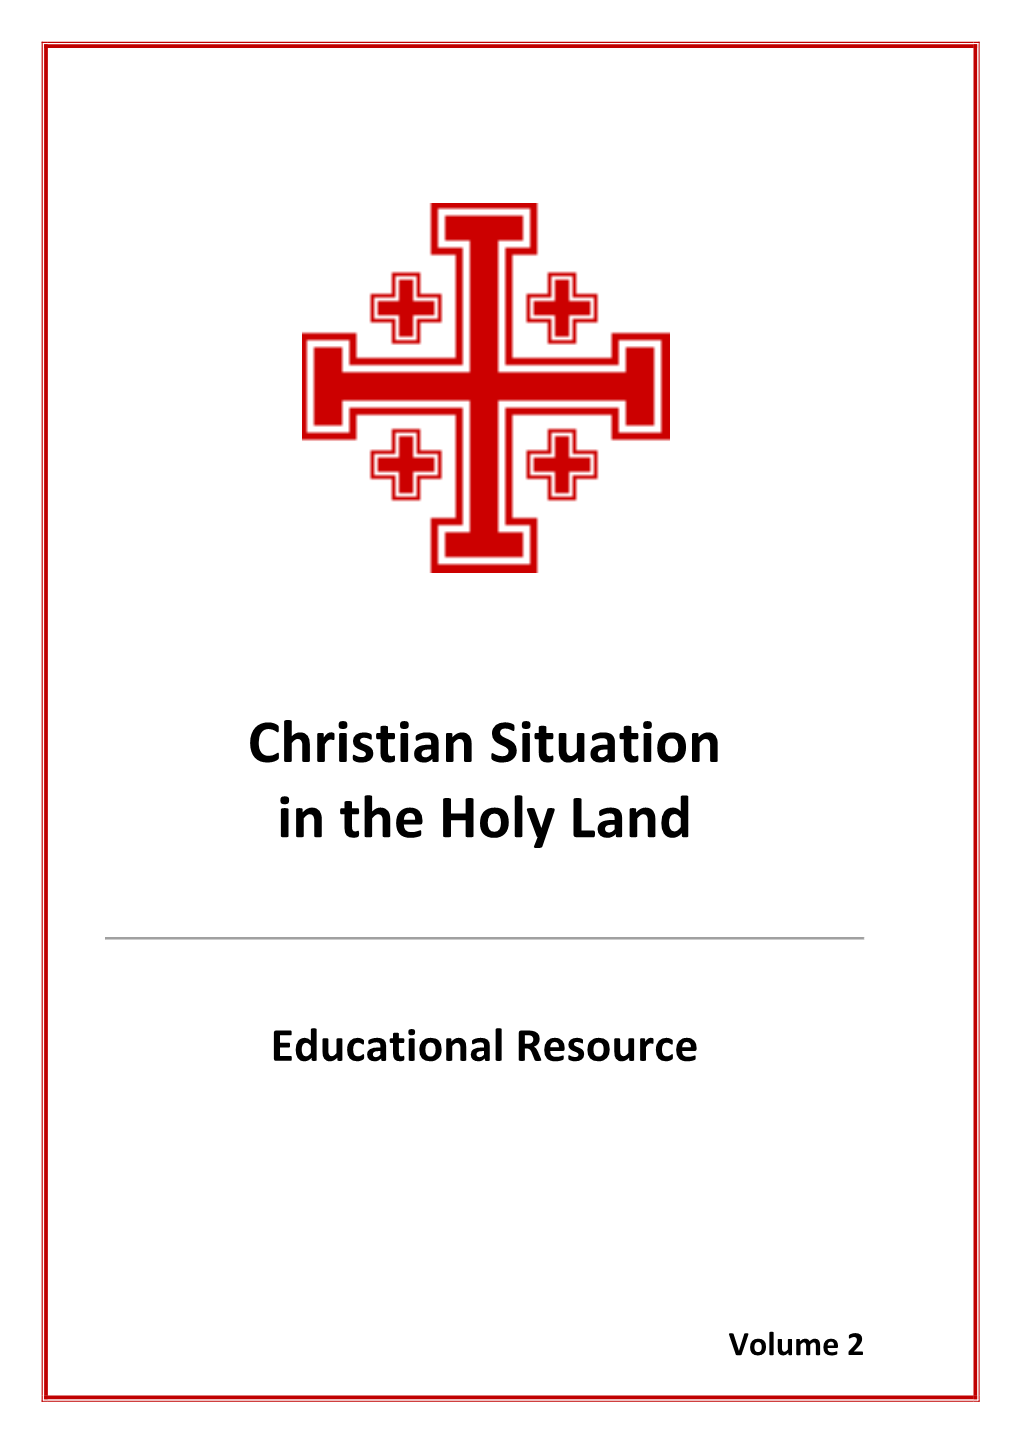 Christian Situation in the Holy Land